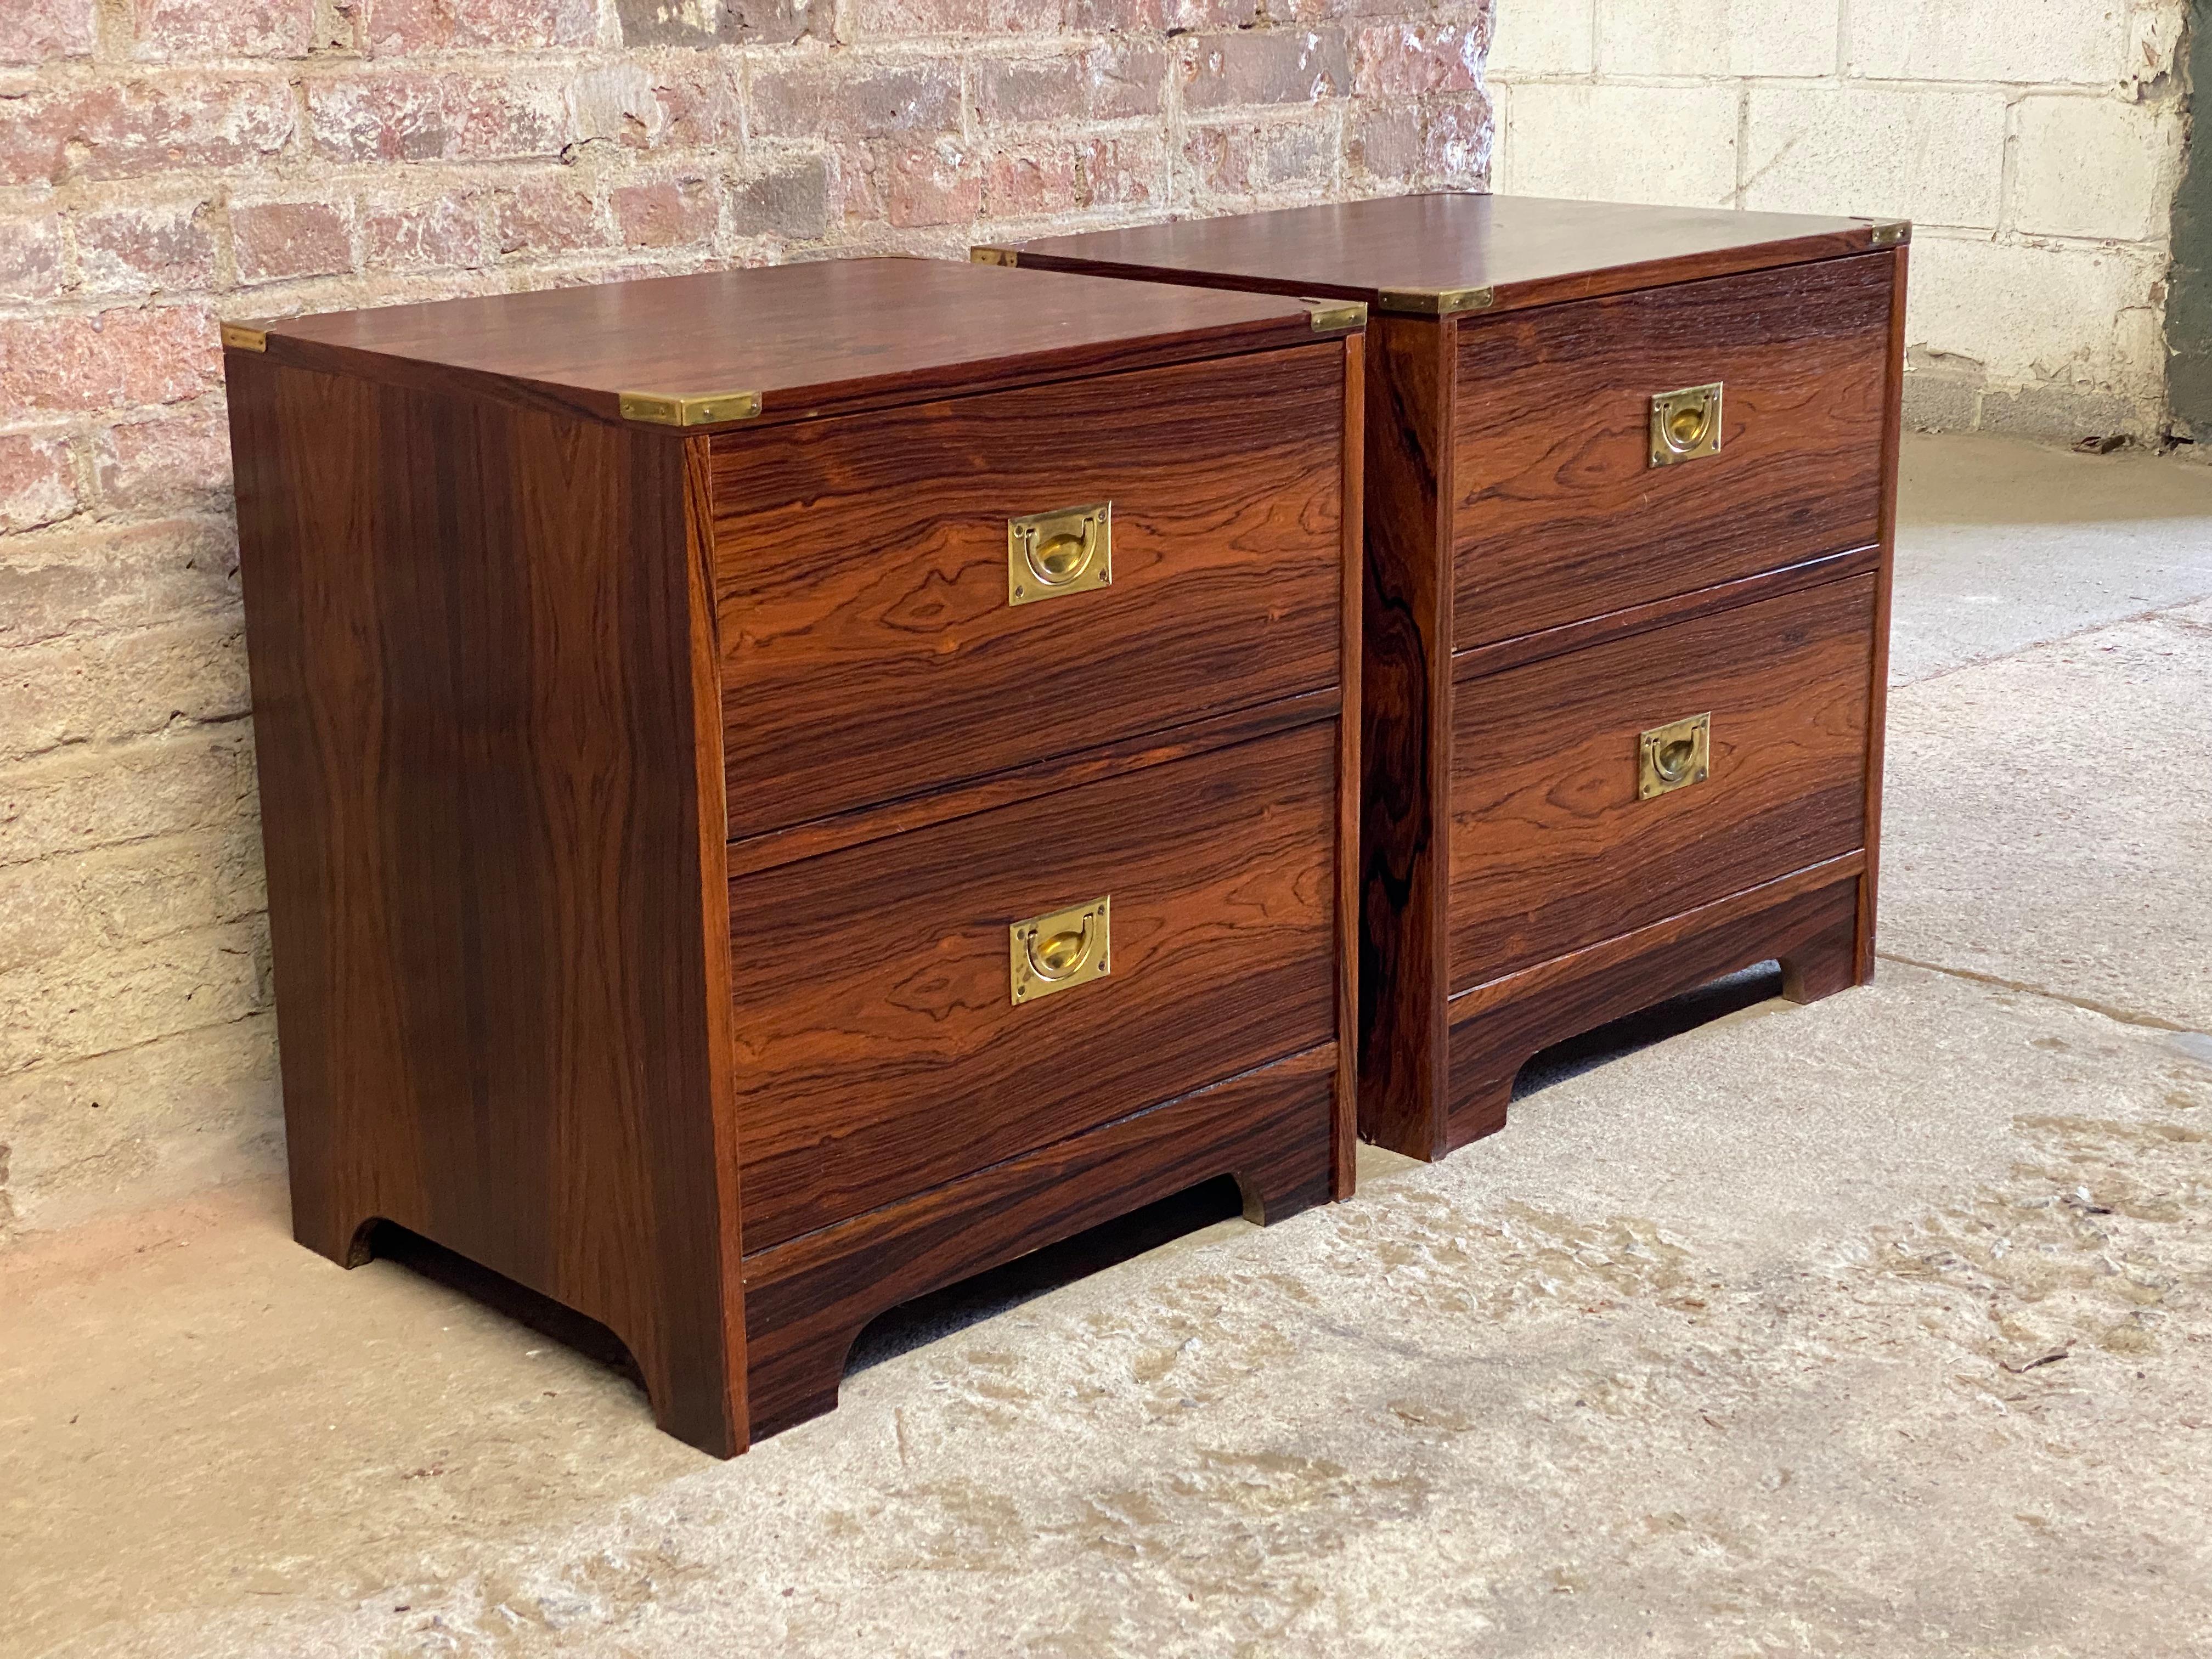 A wonderful pair of highly figured Rosewood Campaign style two drawer end tables or night stands. Brass corner accents with recessed brass hardware pulls. Each has two deep drawers with arched bases. Circa 1970. Good overall condition and